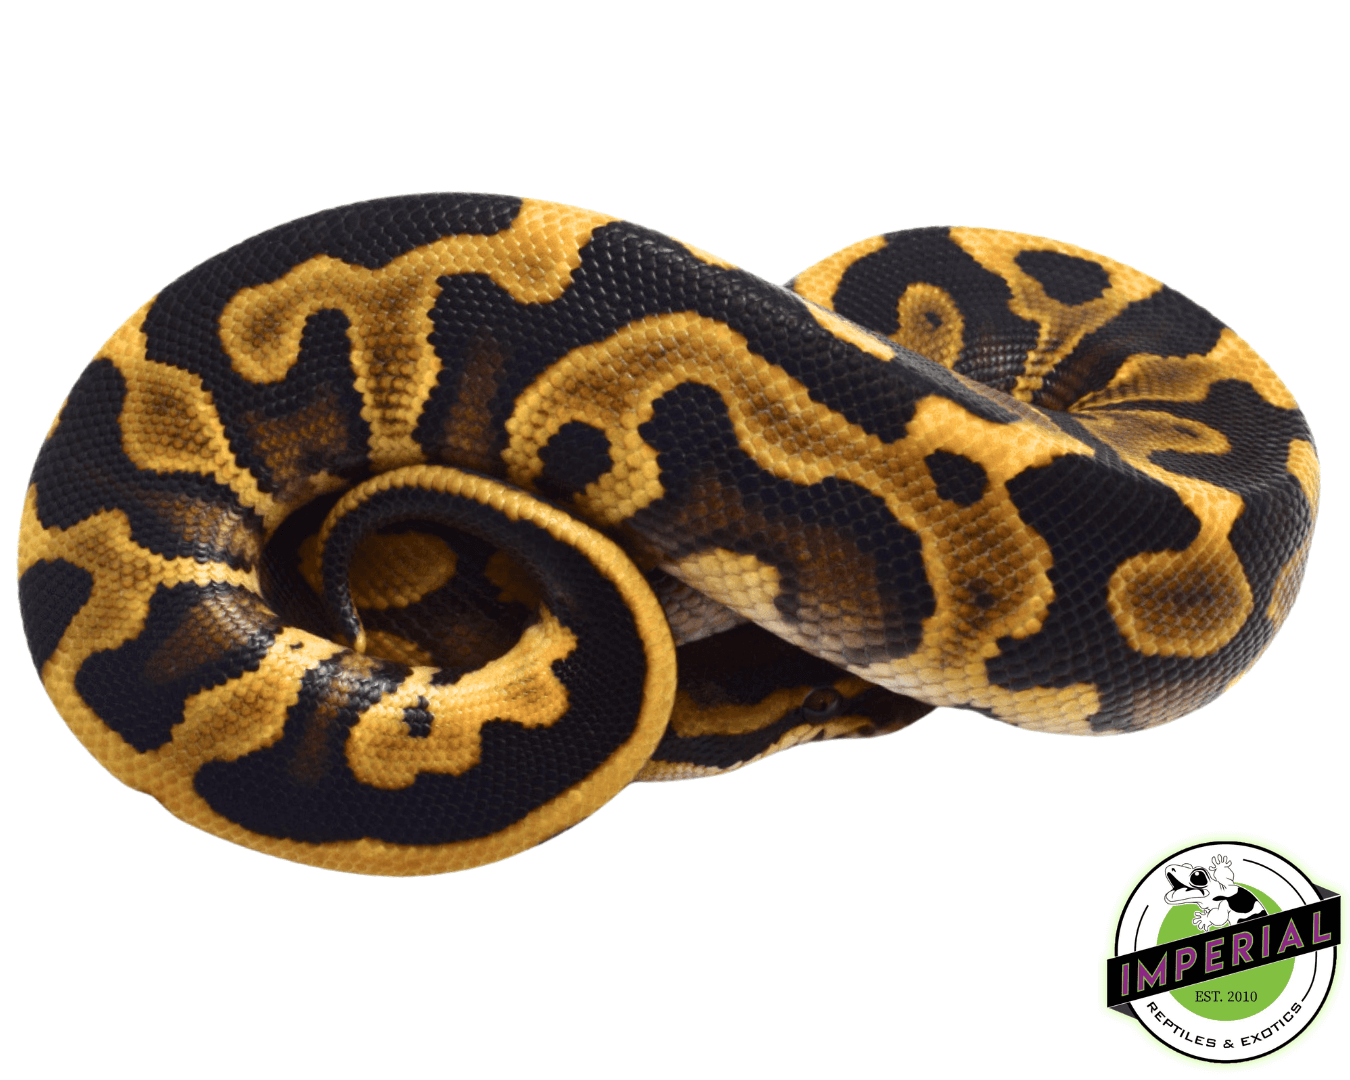 mojave leopard ball python for sale online, buy cheap ball pythons near me